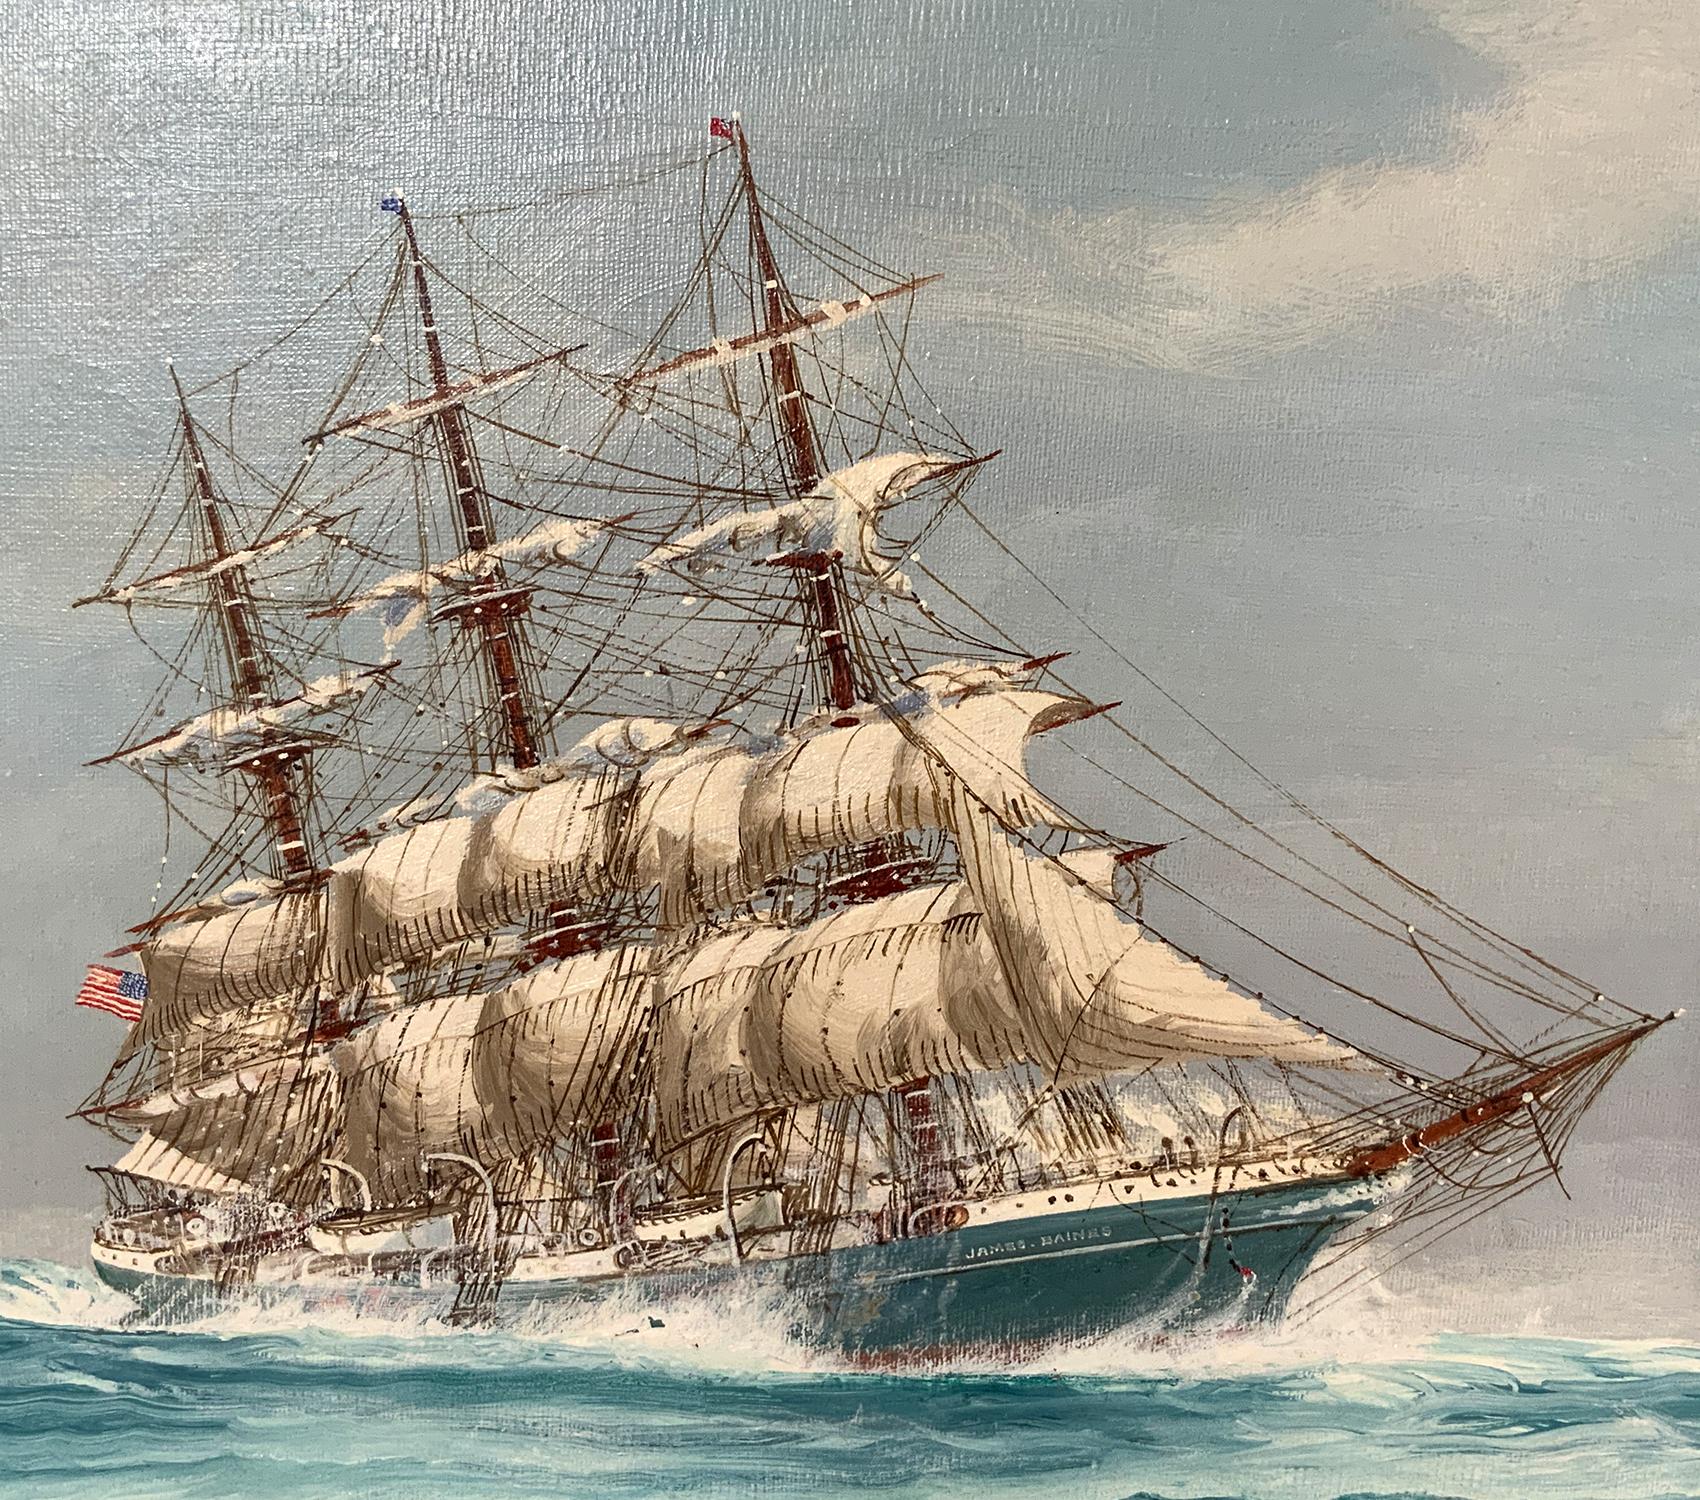 Canvas Painting Of The Clipper Ship James Baines